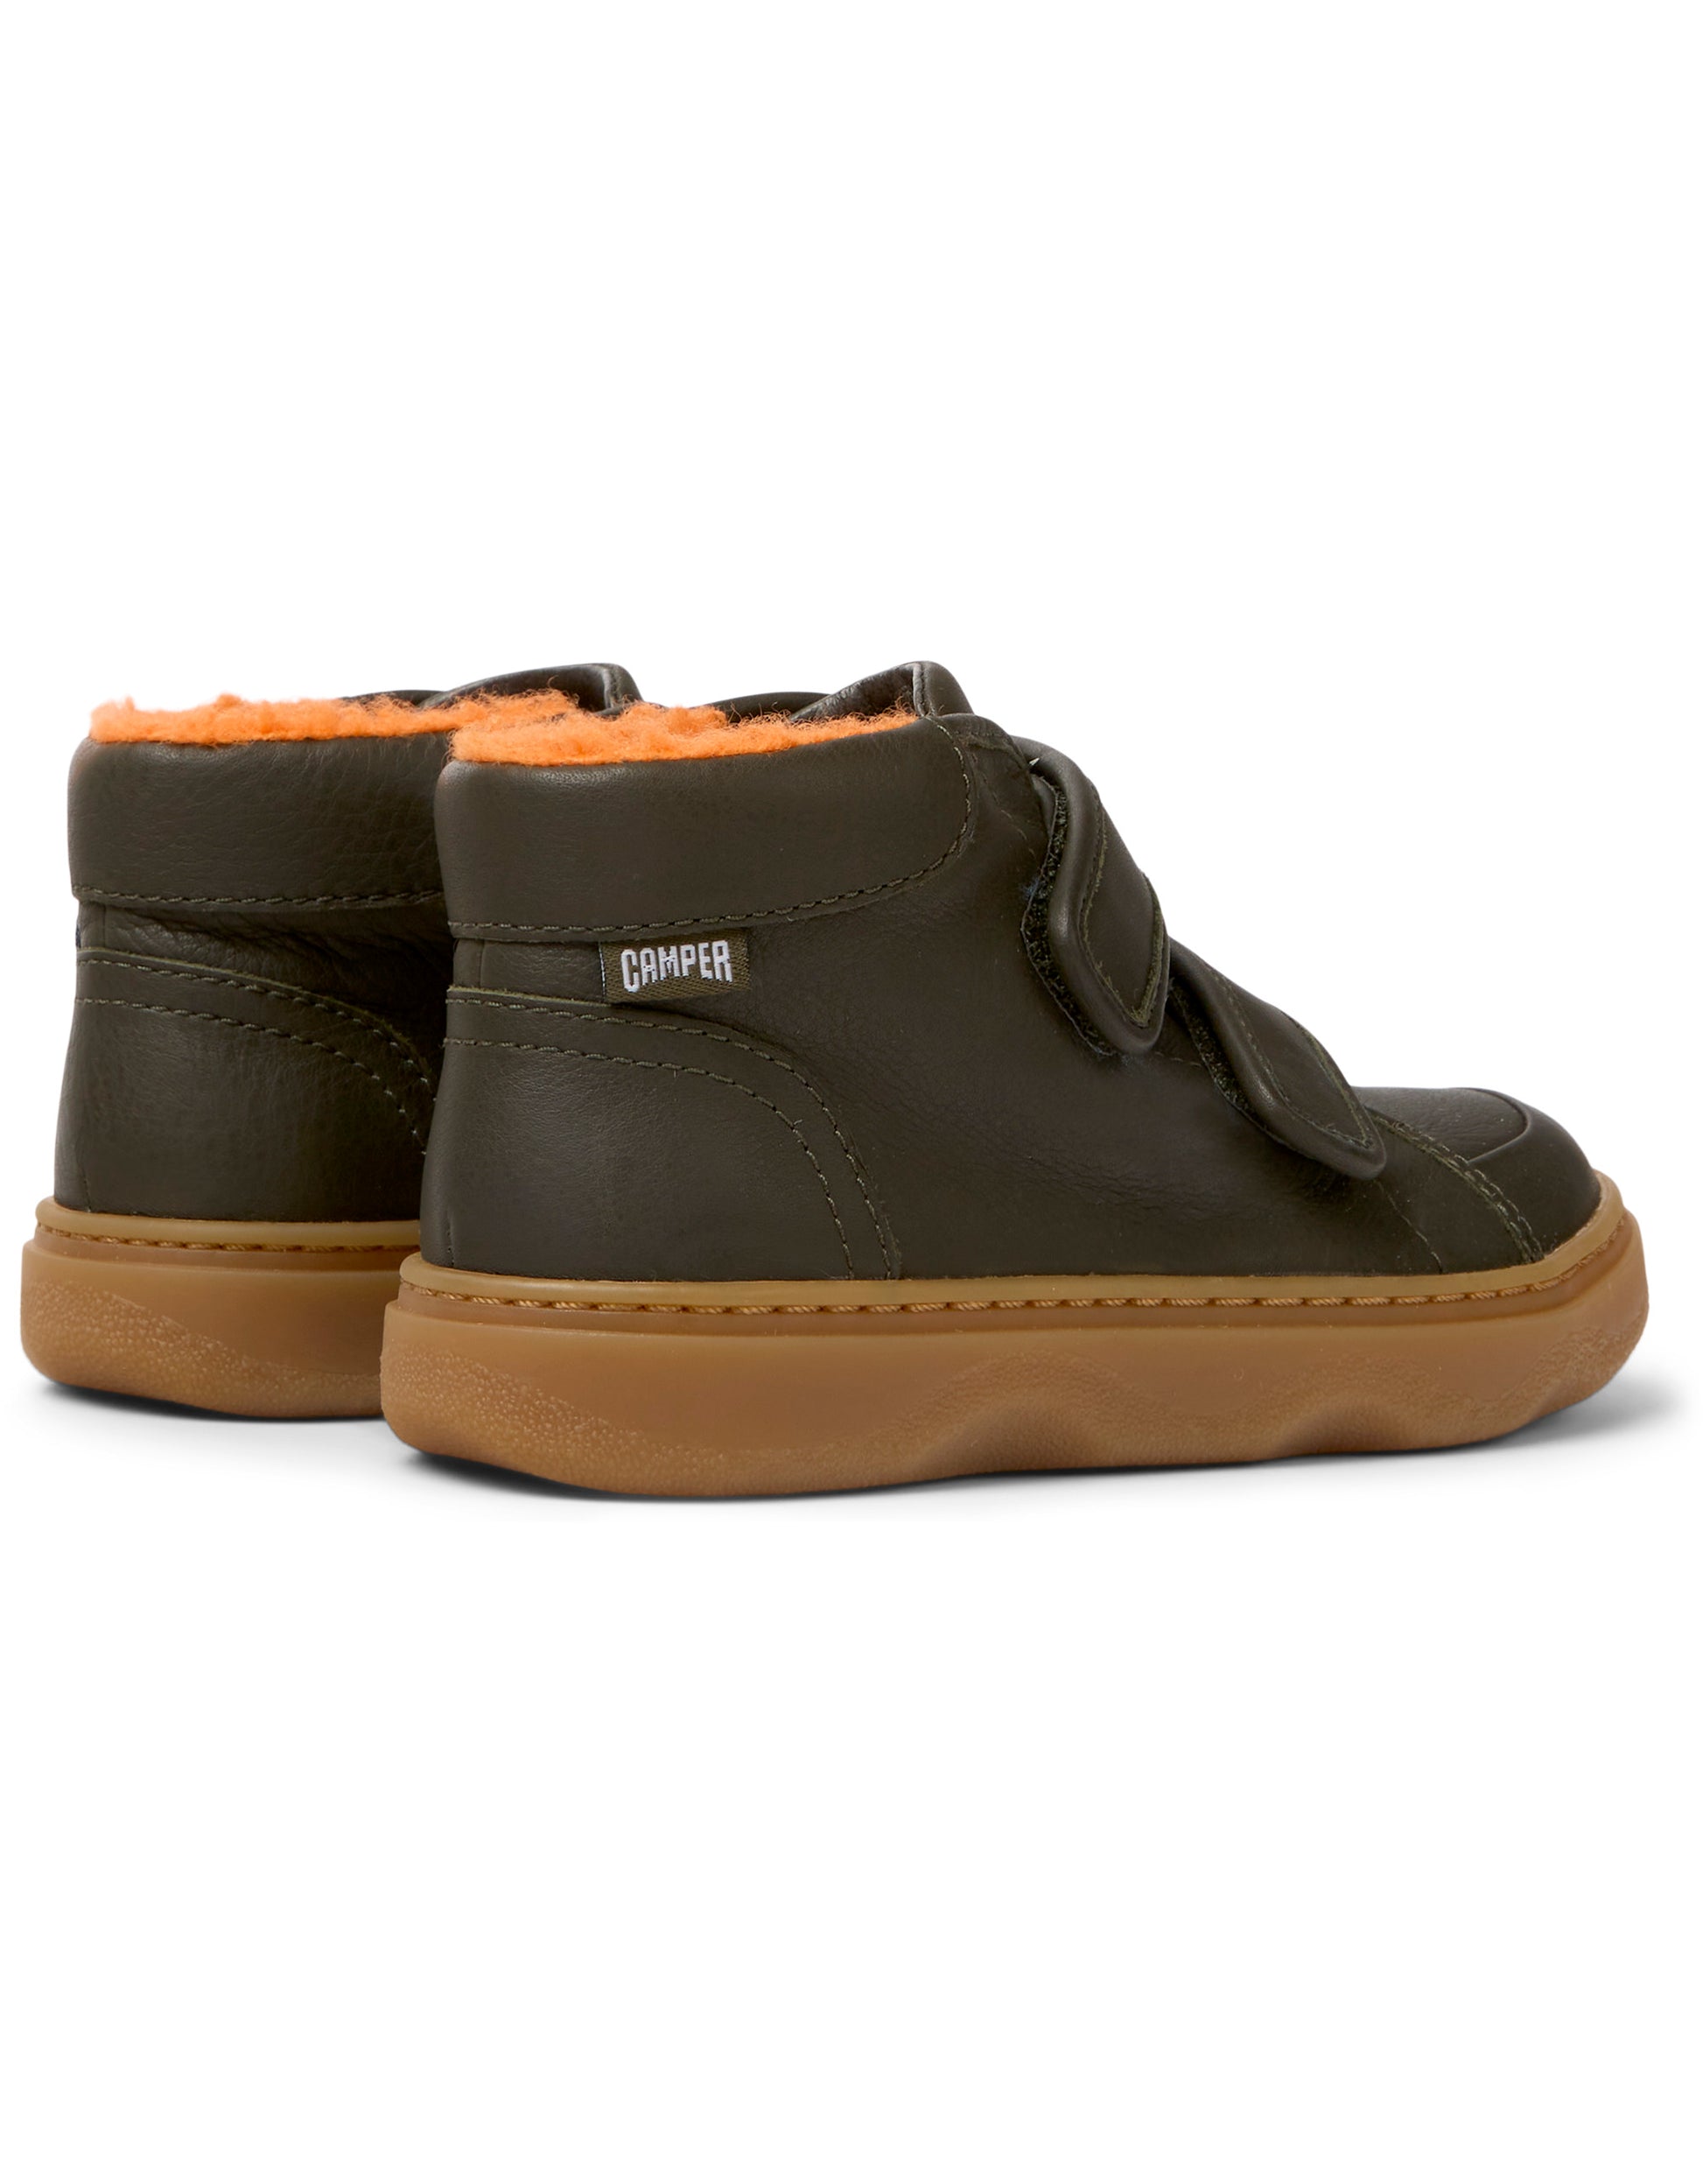 A boys casual ankle boot by Camper, style K900303-004 in brown leather with double velcro fastening. Angkled view.